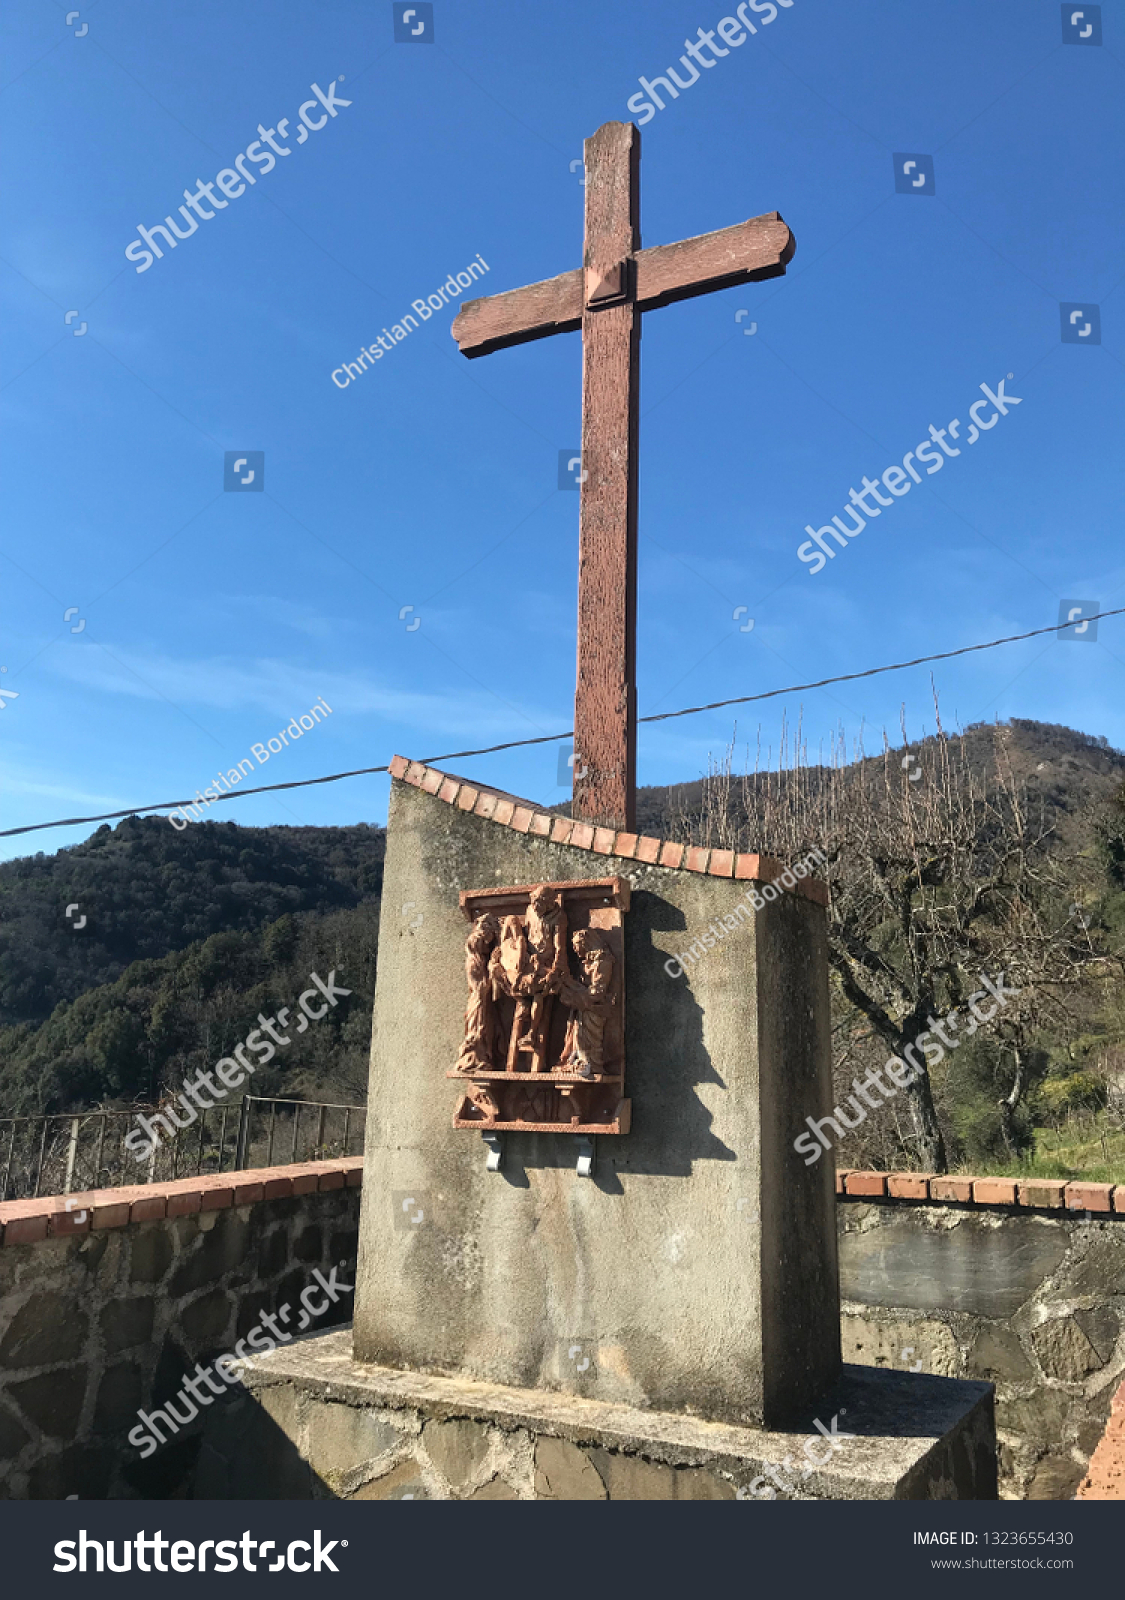 Old rusty metal cross against a blue sky with white clouds #1323655430